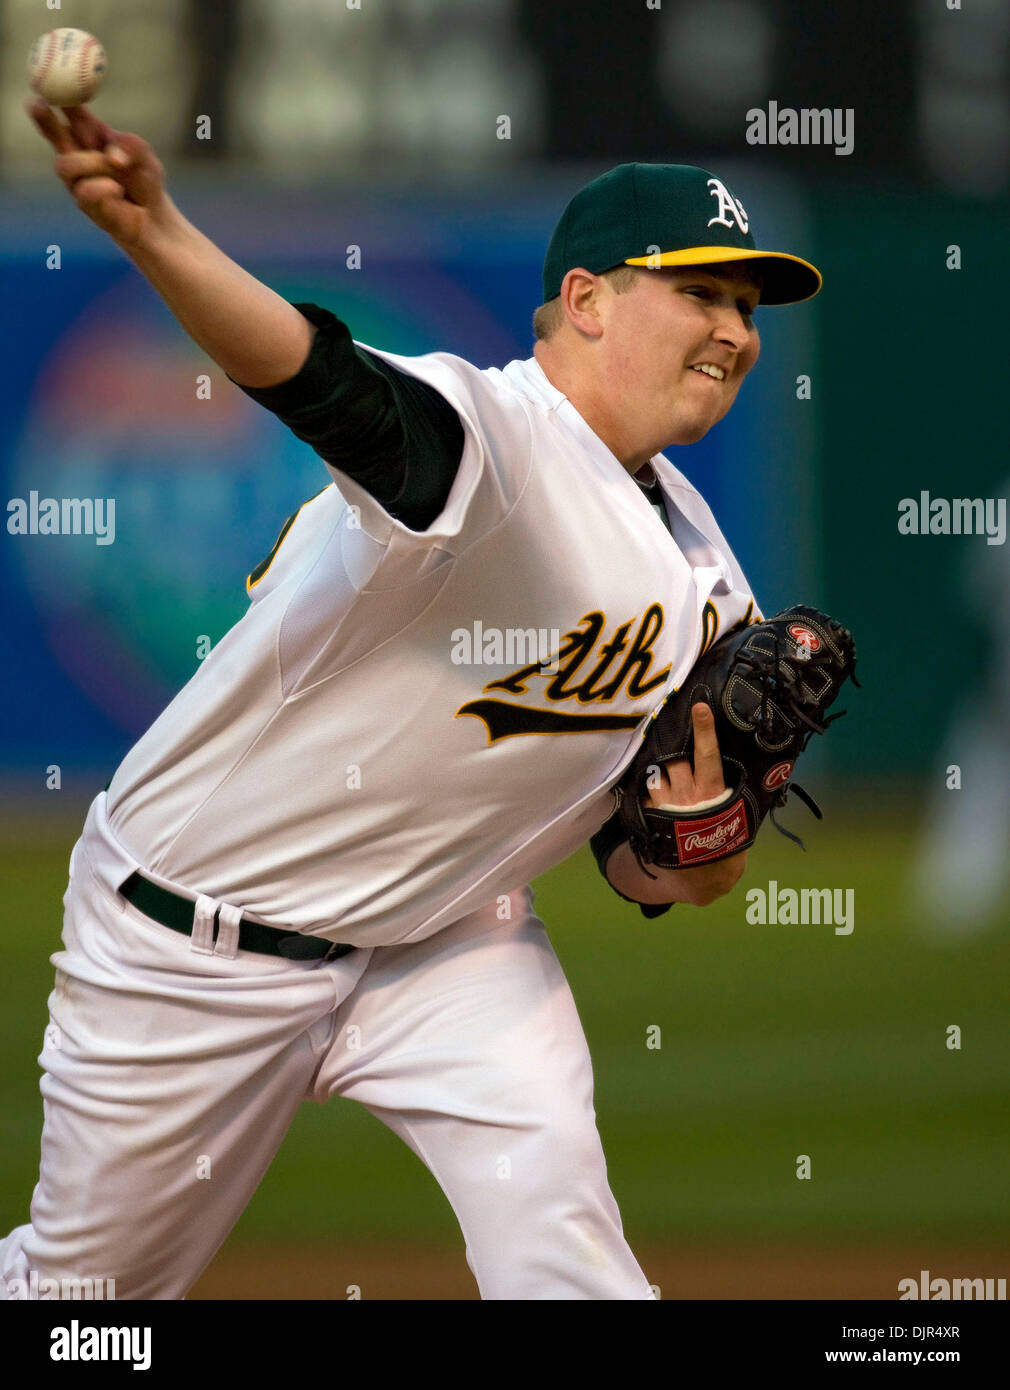 May 21, 2010 - Oakland, California, USA - TREVOR CAHILL working from home during the second inning of play against the San Francisco Giants in the Battle of the Bay Series.  Oakland beat SF 6 -1. (Credit Image: © William Mancebo/ZUMApress.com) Stock Photo